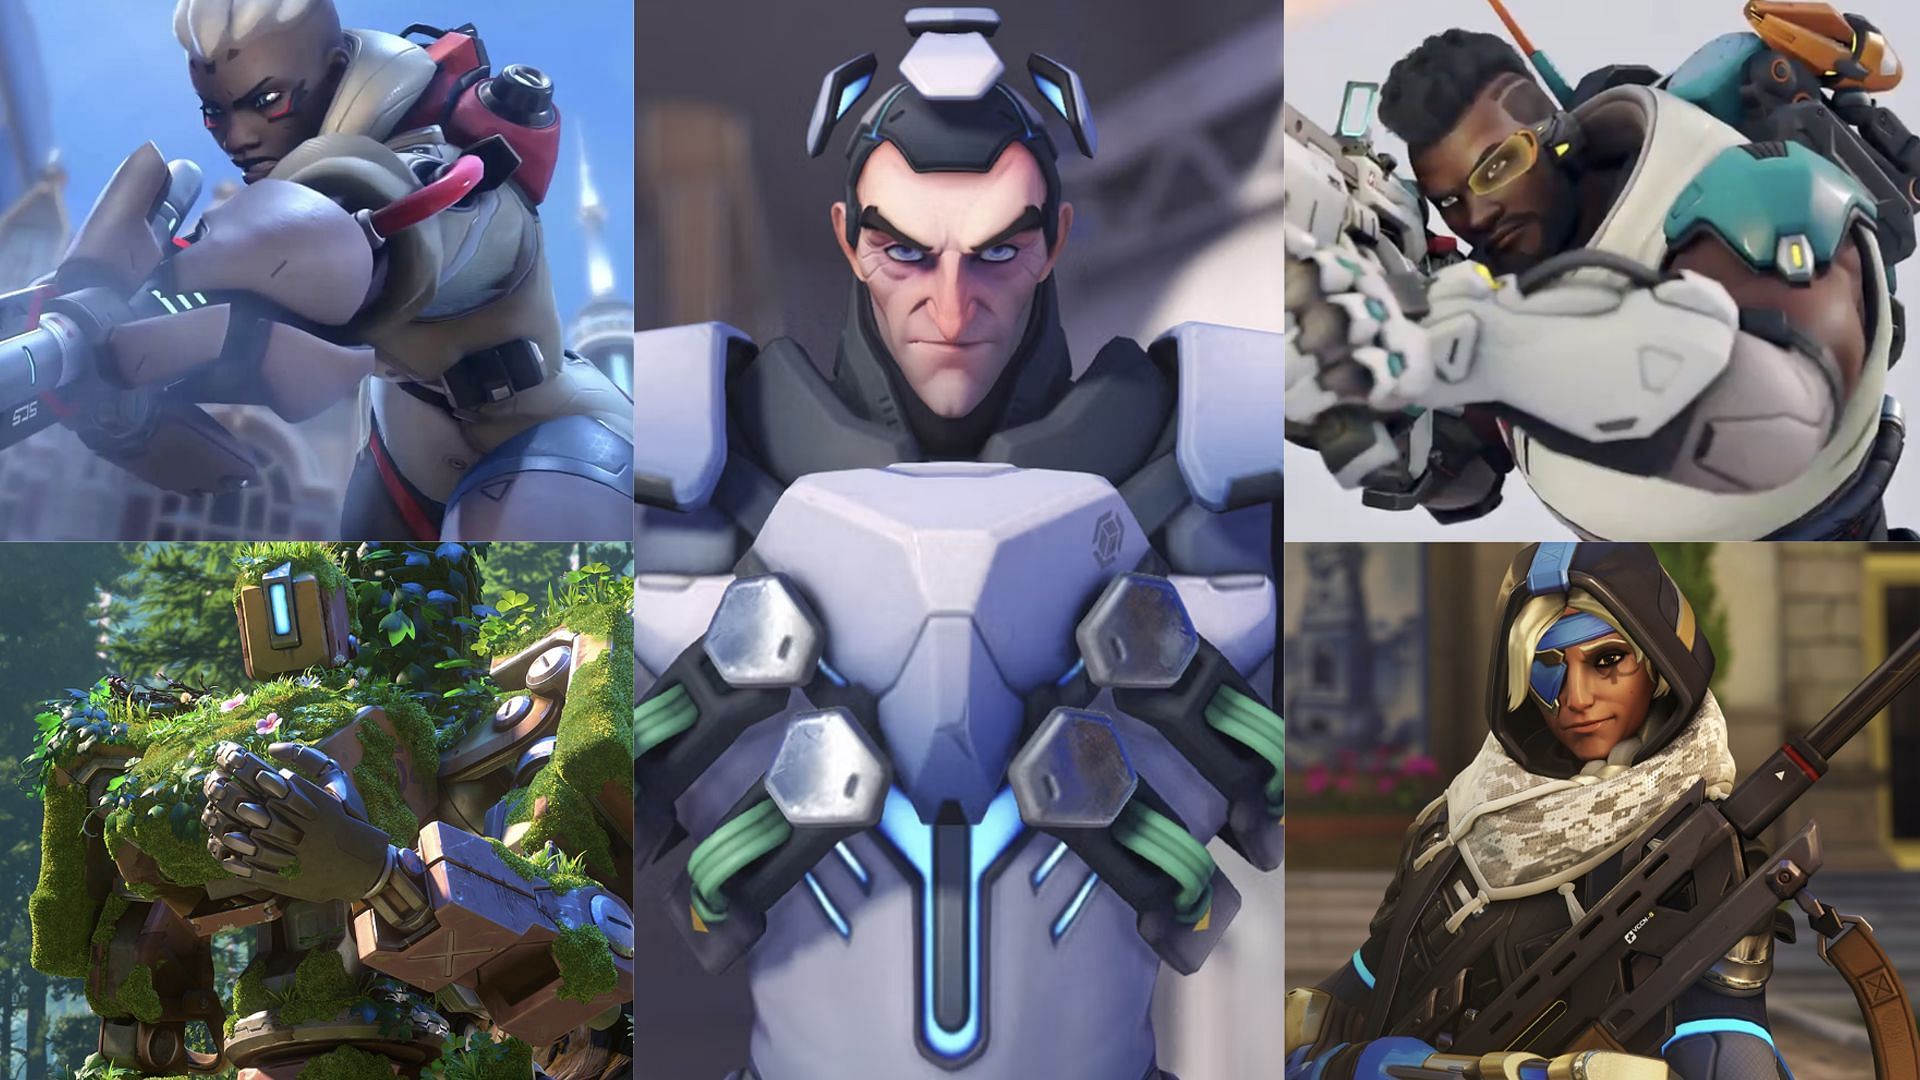 Team composition for Sigma, Bastion, Sojourn, Ana, and Baptiste (Image via Sportskeeda and Blizzard Entertainment)